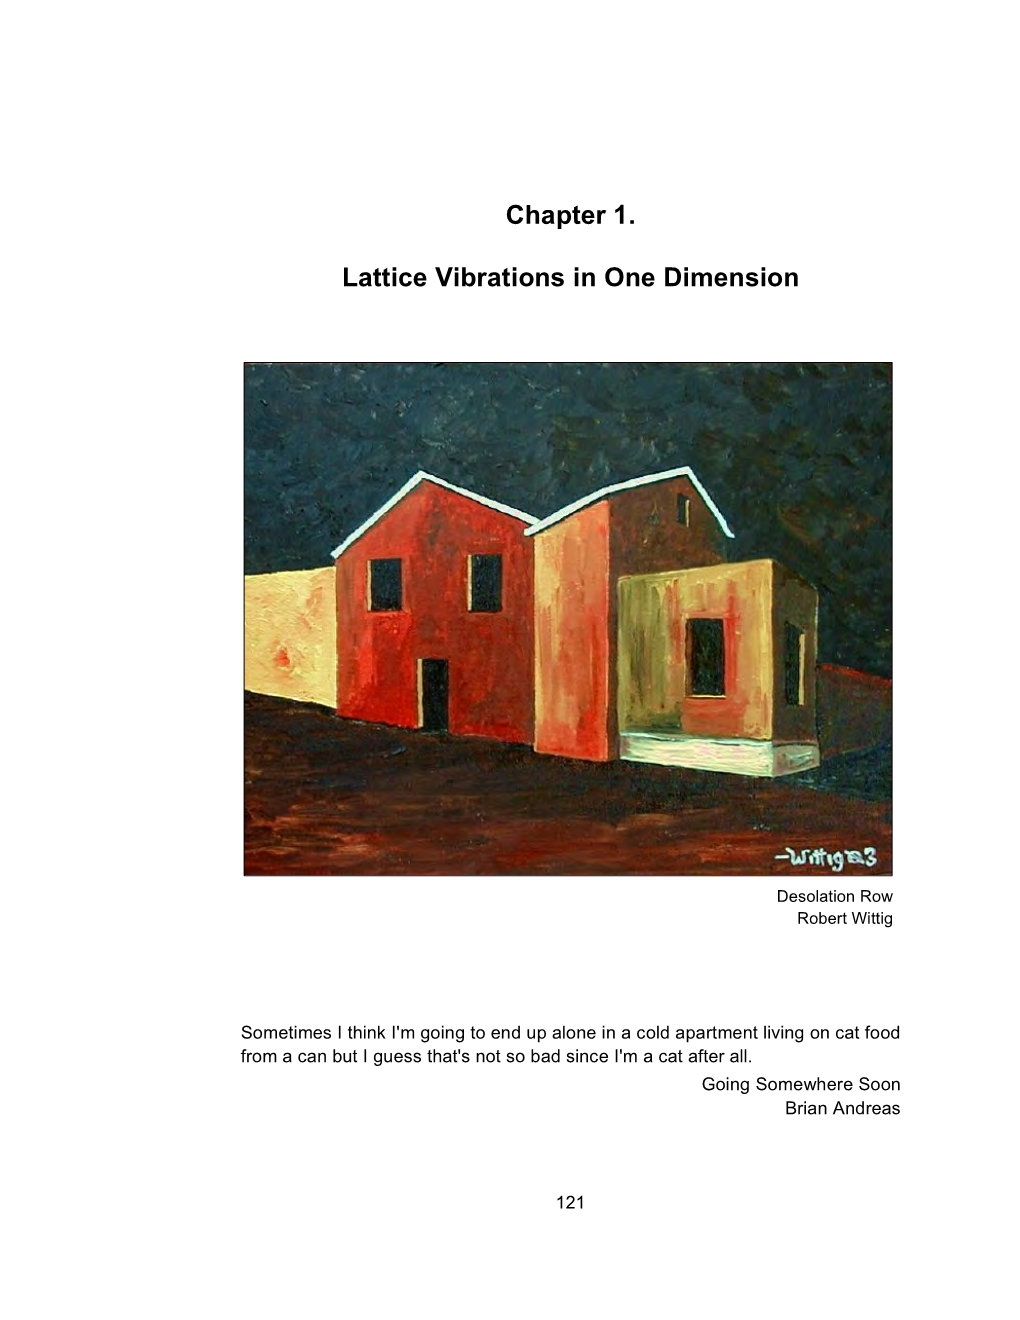 Chapter 1. Lattice Vibrations in One Dimension